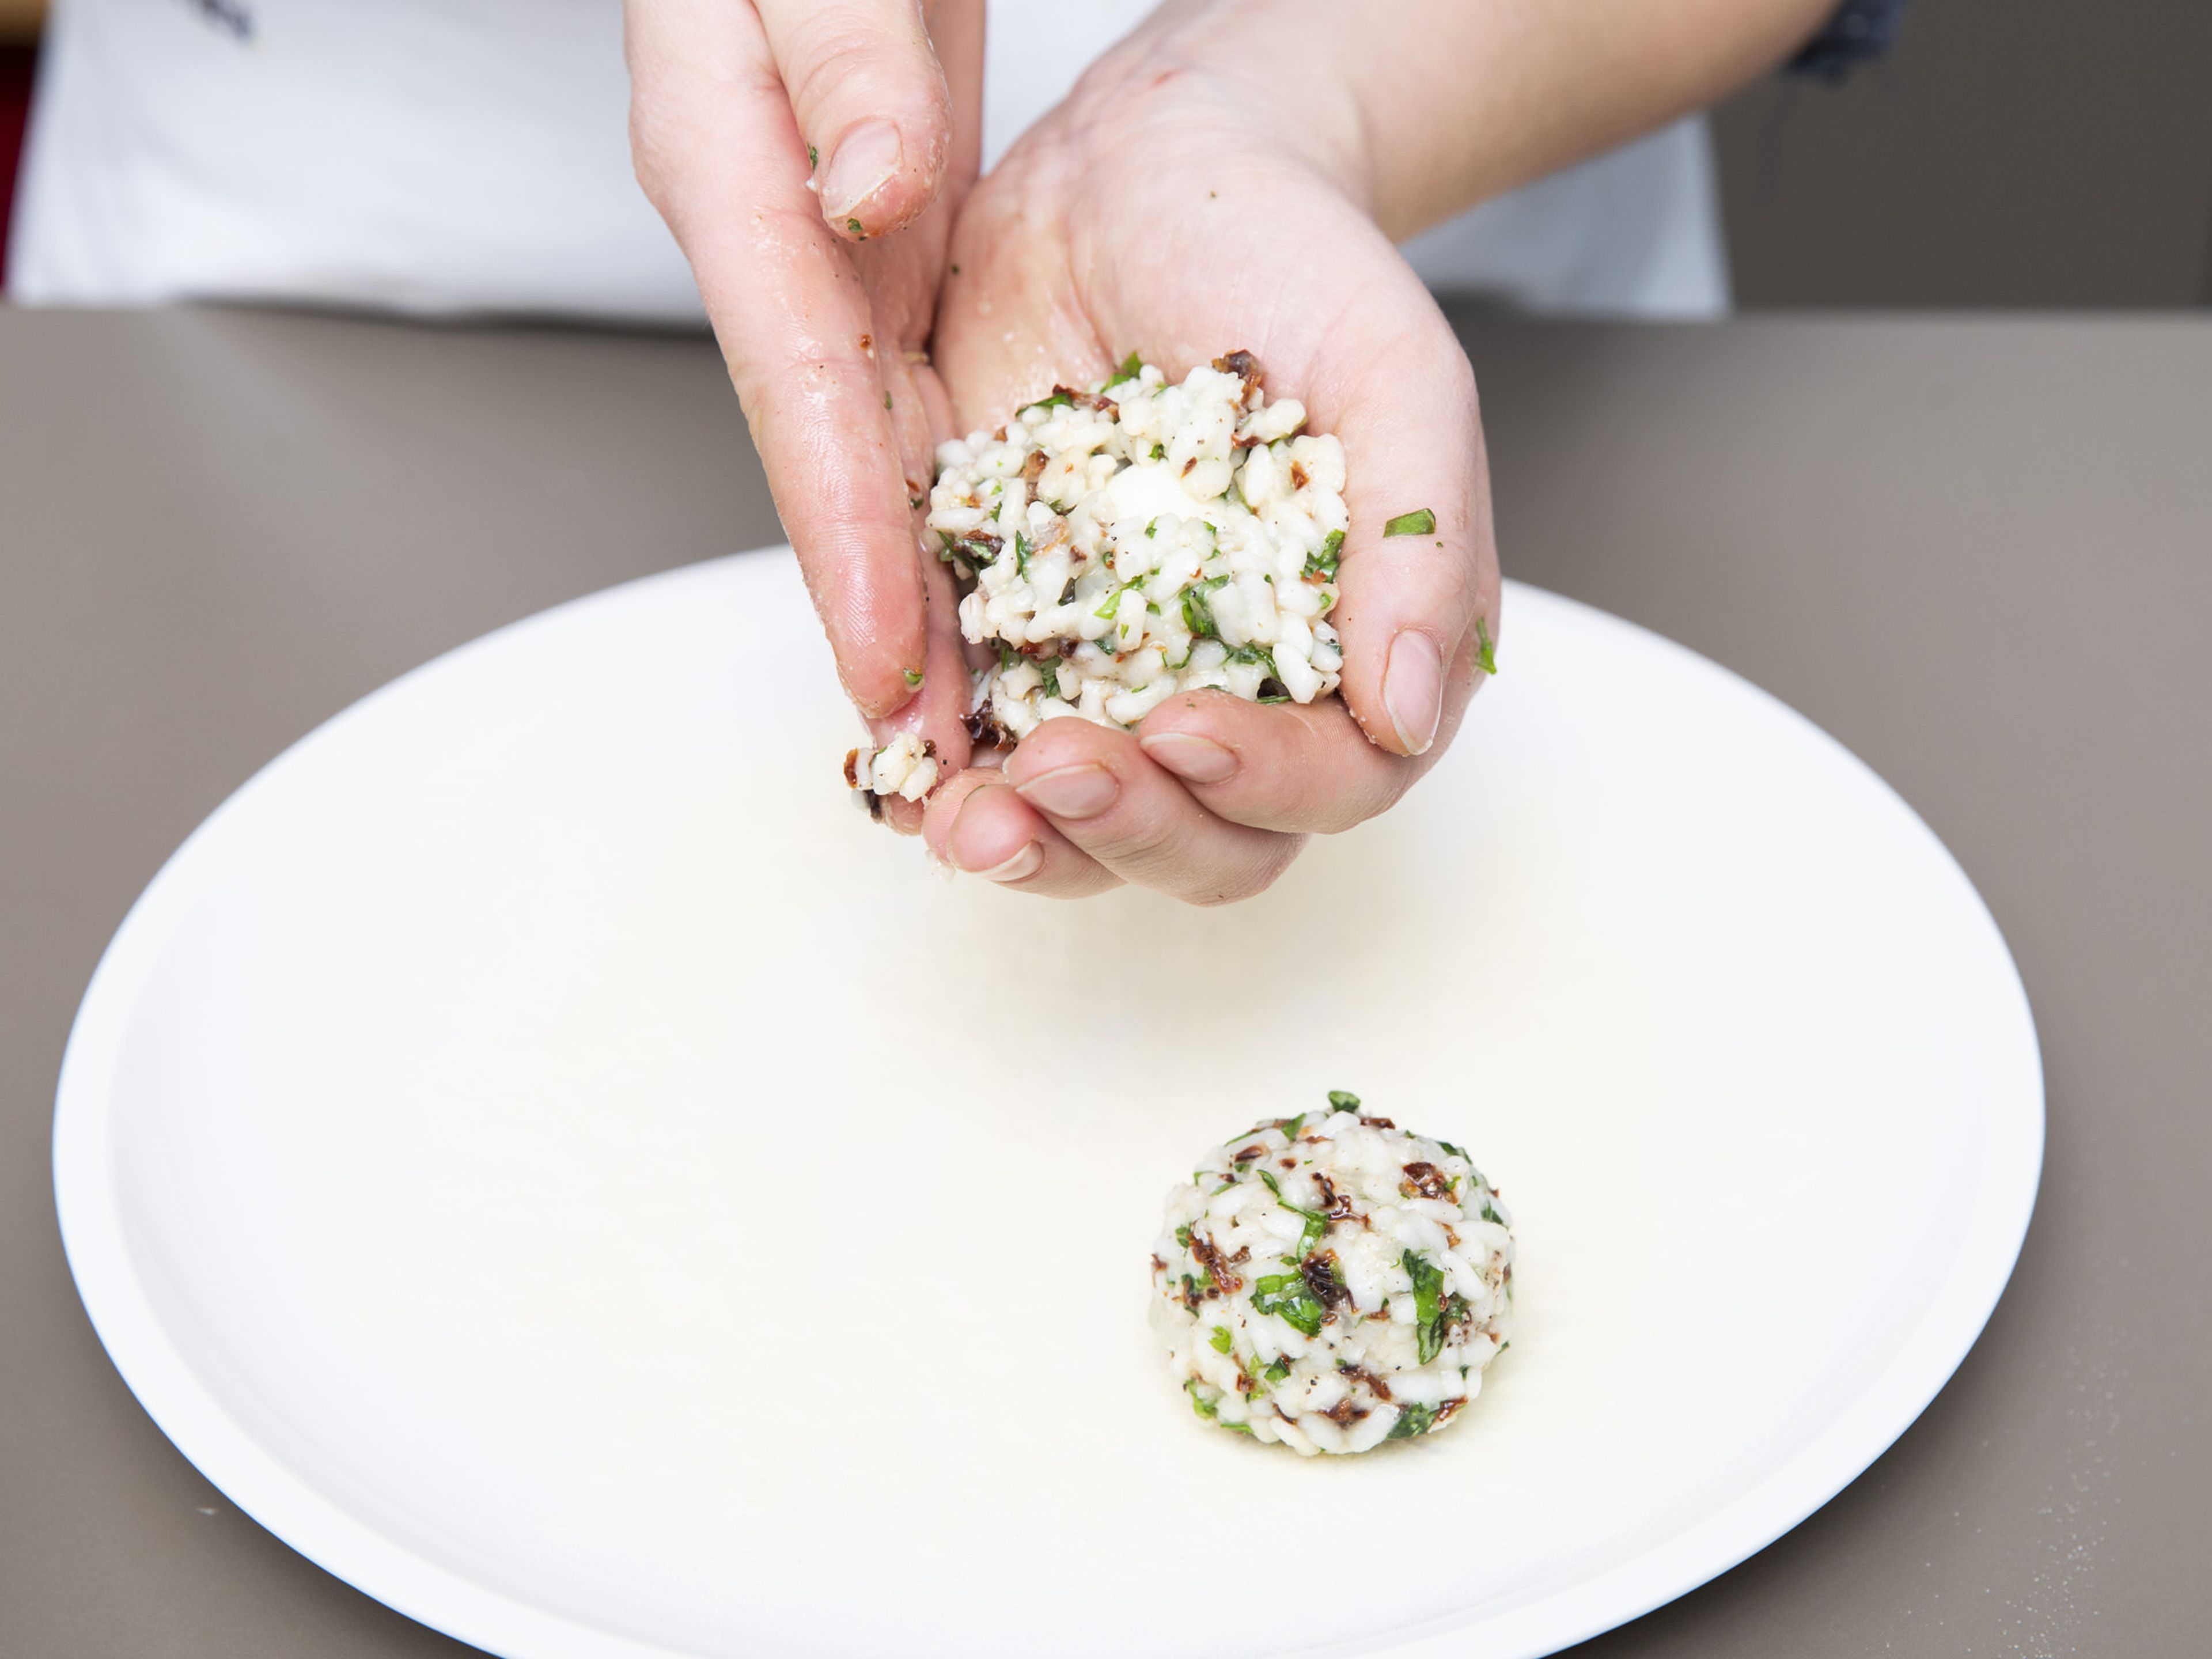 Divide mozzarella cheese into smaller pieces. With damp hands, form some of the risotto mixture around each piece of mozzarella and roll into equal-sized balls. If you want to make the breading easier, refrigerate the arancini for approx. 30 min.